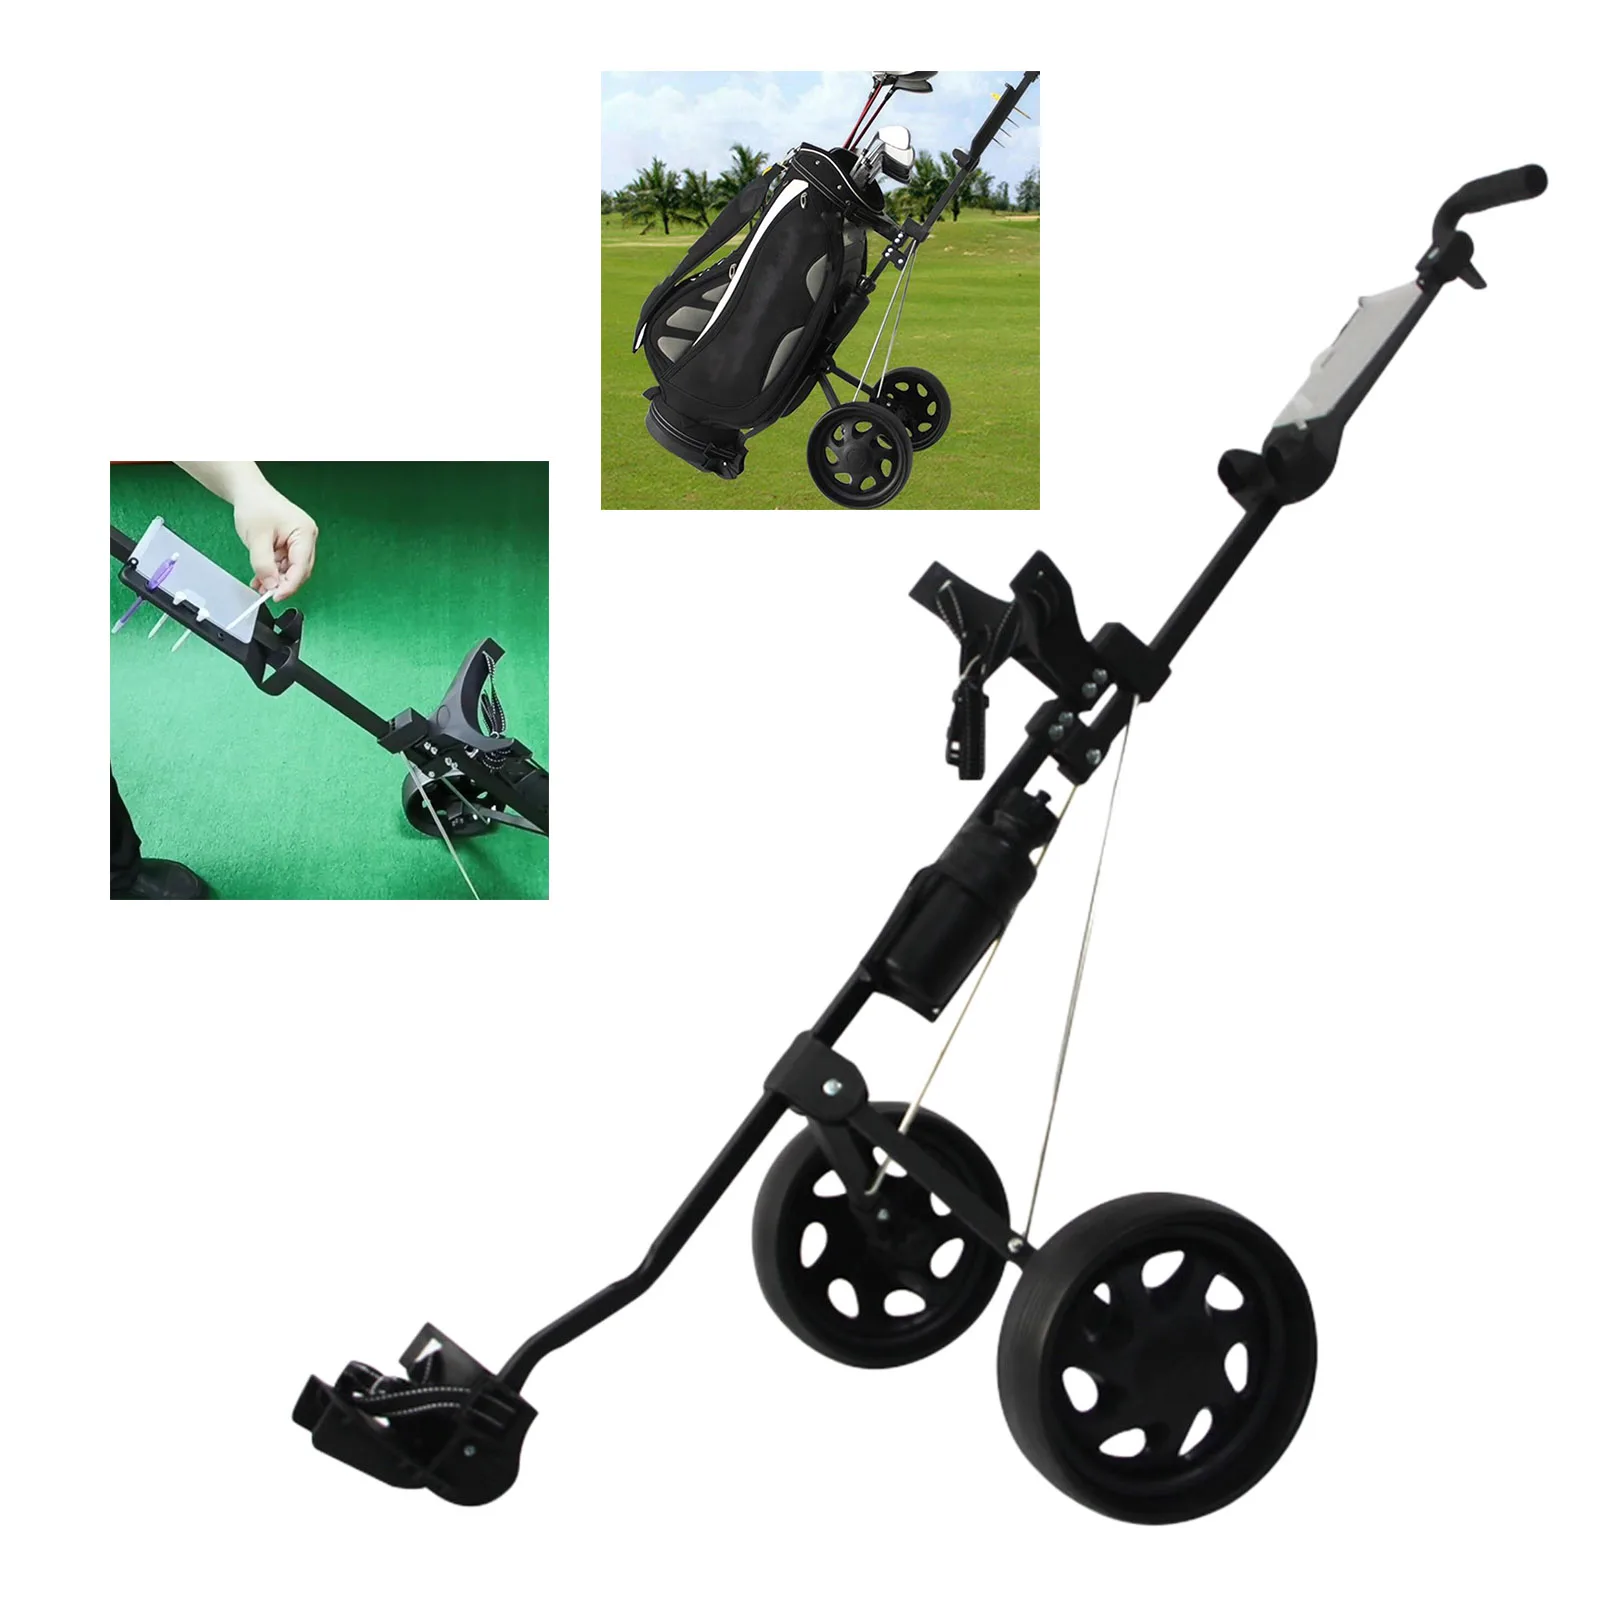 Golf Trolley Professional Folding Golf Bag Trolley Outdoor Sports Multifunctional Range Supplies Push Pull Golf Cart for Gifts